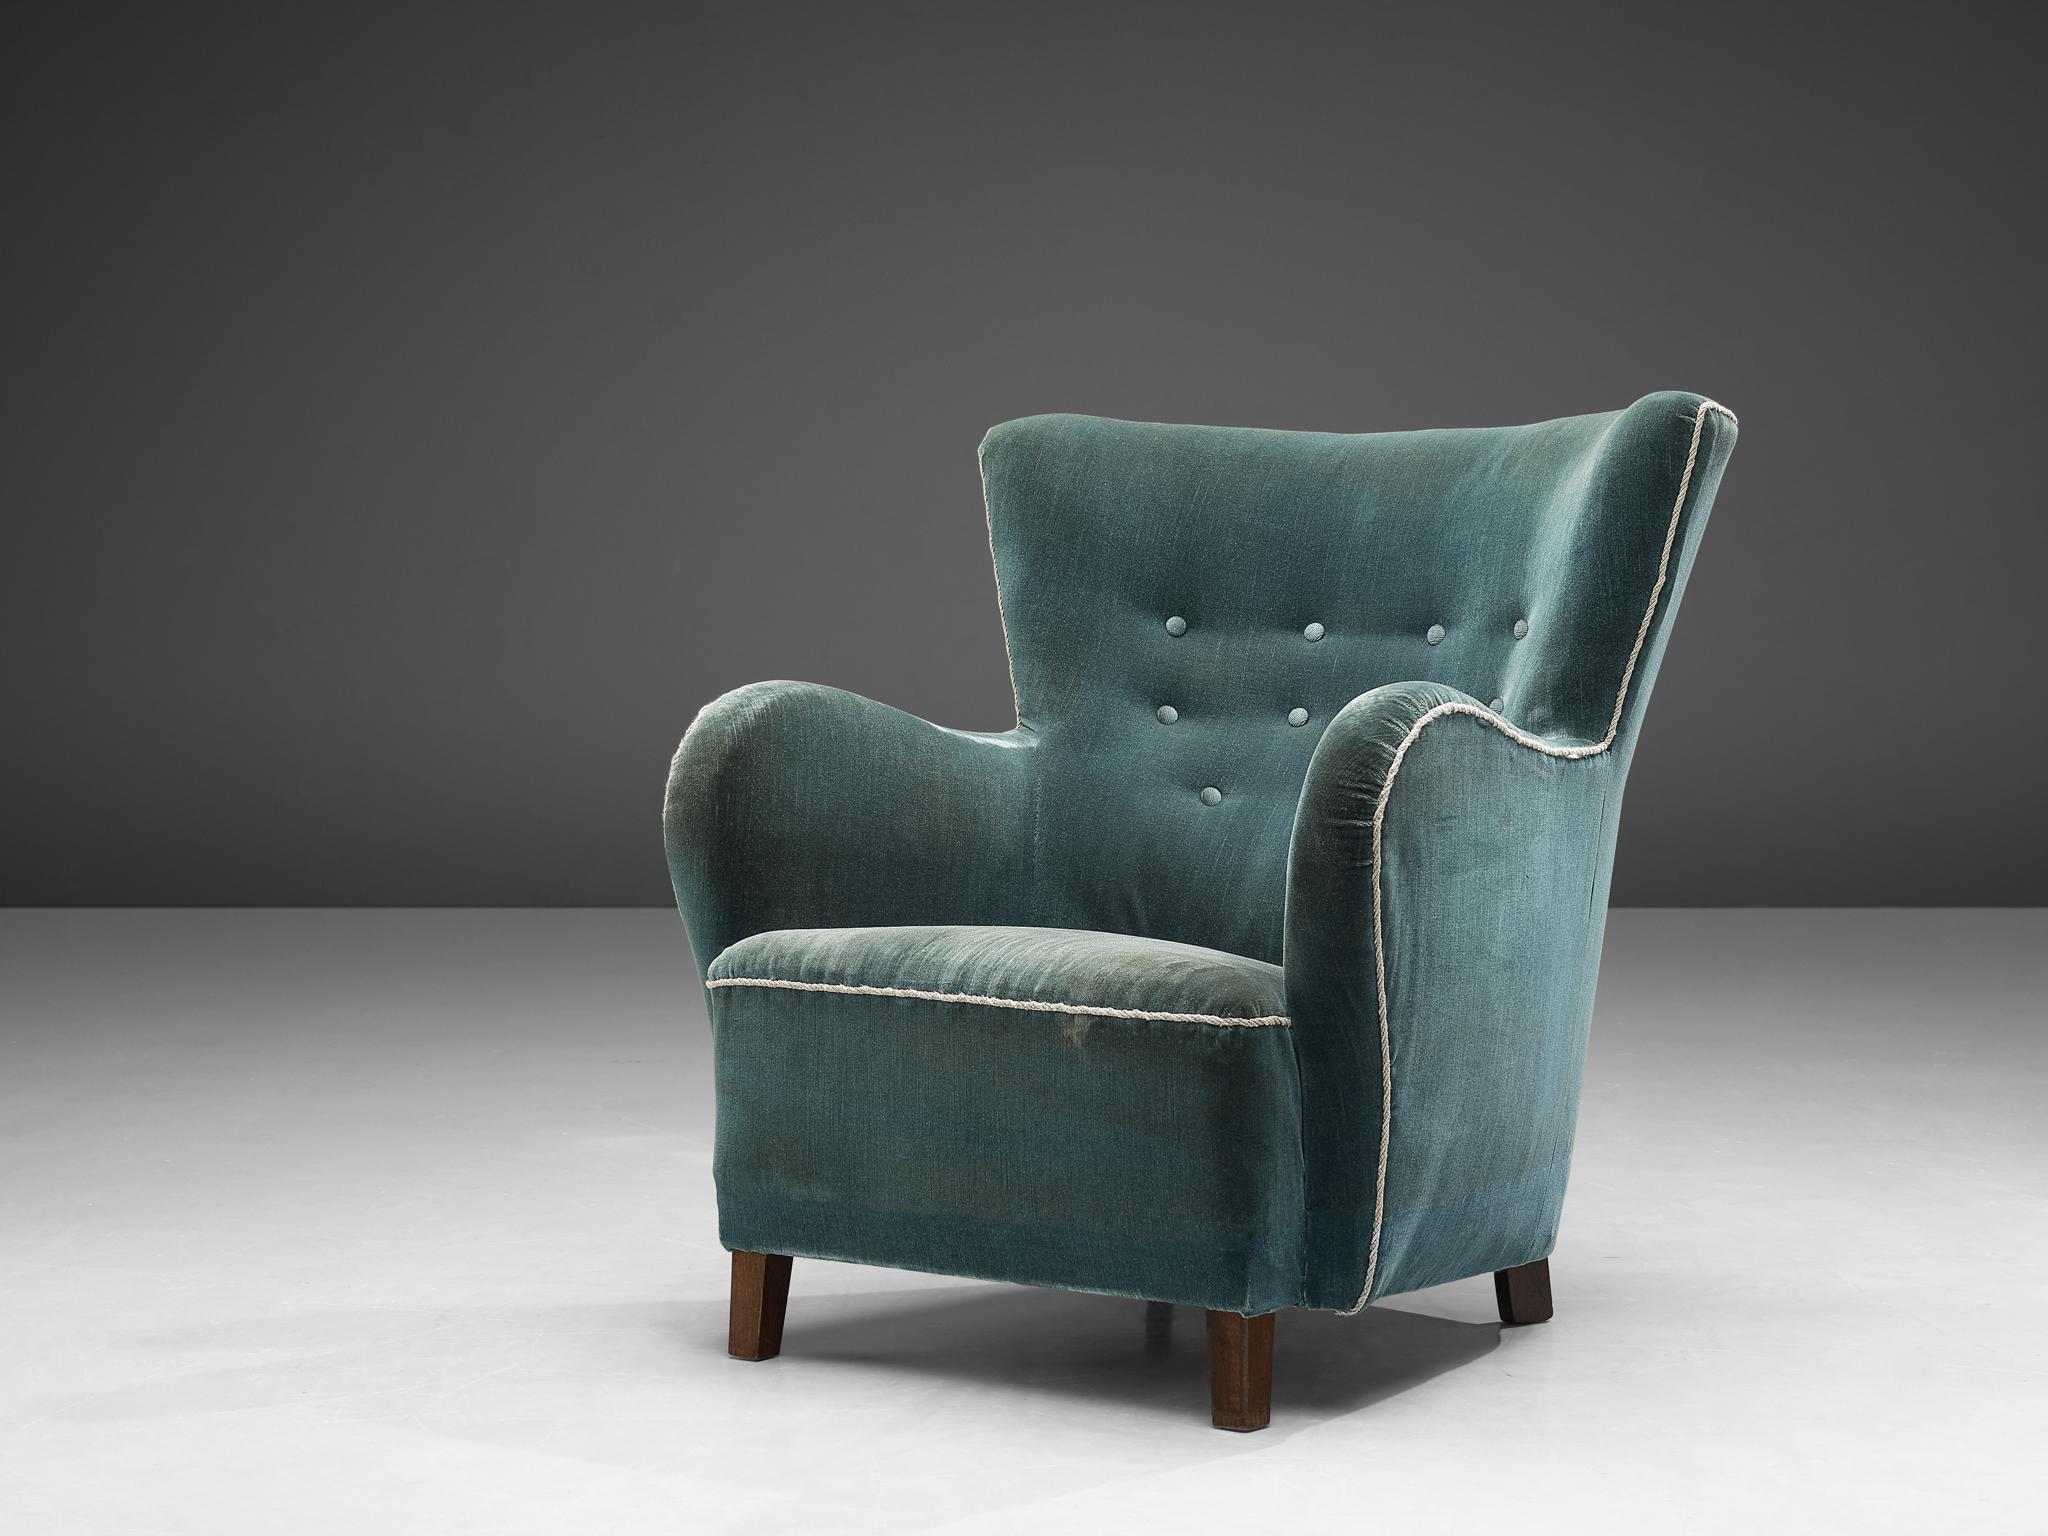 Lounge chair, wood, blue velvet, Denmark, 1950s

This archetypical wingback chair of the 1950s is both extremely comfortable and pleasing to the eyes. This easy chair with stained legs features a wing and tufted backrest. The seat is thick and the